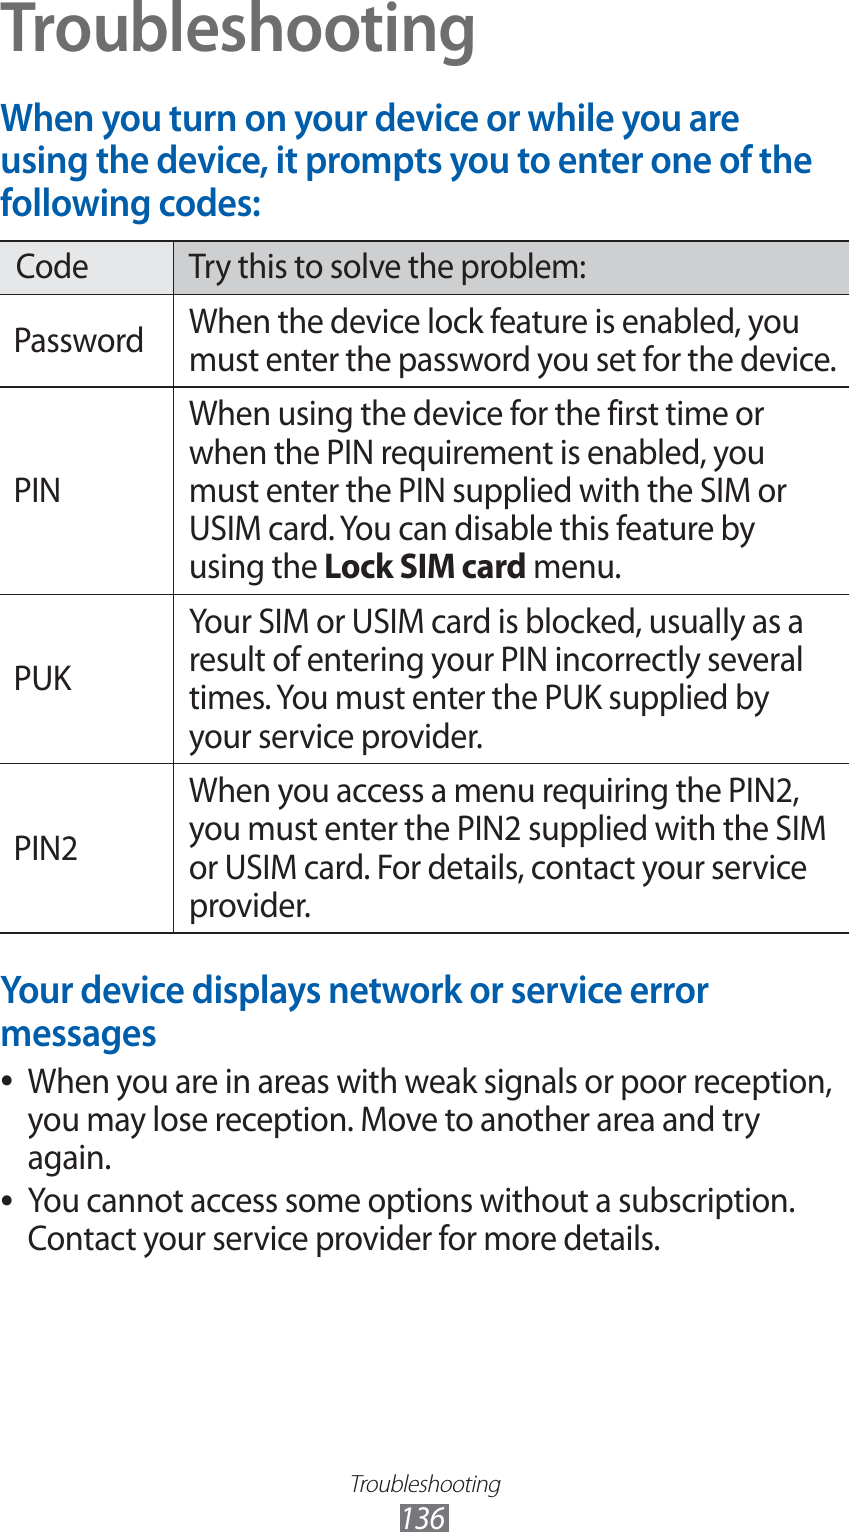 Troubleshooting136TroubleshootingWhen you turn on your device or while you are using the device, it prompts you to enter one of the following codes:Code Try this to solve the problem:Password When the device lock feature is enabled, you must enter the password you set for the device.PINWhen using the device for the first time or when the PIN requirement is enabled, you must enter the PIN supplied with the SIM or USIM card. You can disable this feature by using the Lock SIM card menu.PUKYour SIM or USIM card is blocked, usually as a result of entering your PIN incorrectly several times. You must enter the PUK supplied by your service provider. PIN2When you access a menu requiring the PIN2, you must enter the PIN2 supplied with the SIM or USIM card. For details, contact your service provider.Your device displays network or service error messagesWhen you are in areas with weak signals or poor reception,  ●you may lose reception. Move to another area and try again.You cannot access some options without a subscription.  ●Contact your service provider for more details.